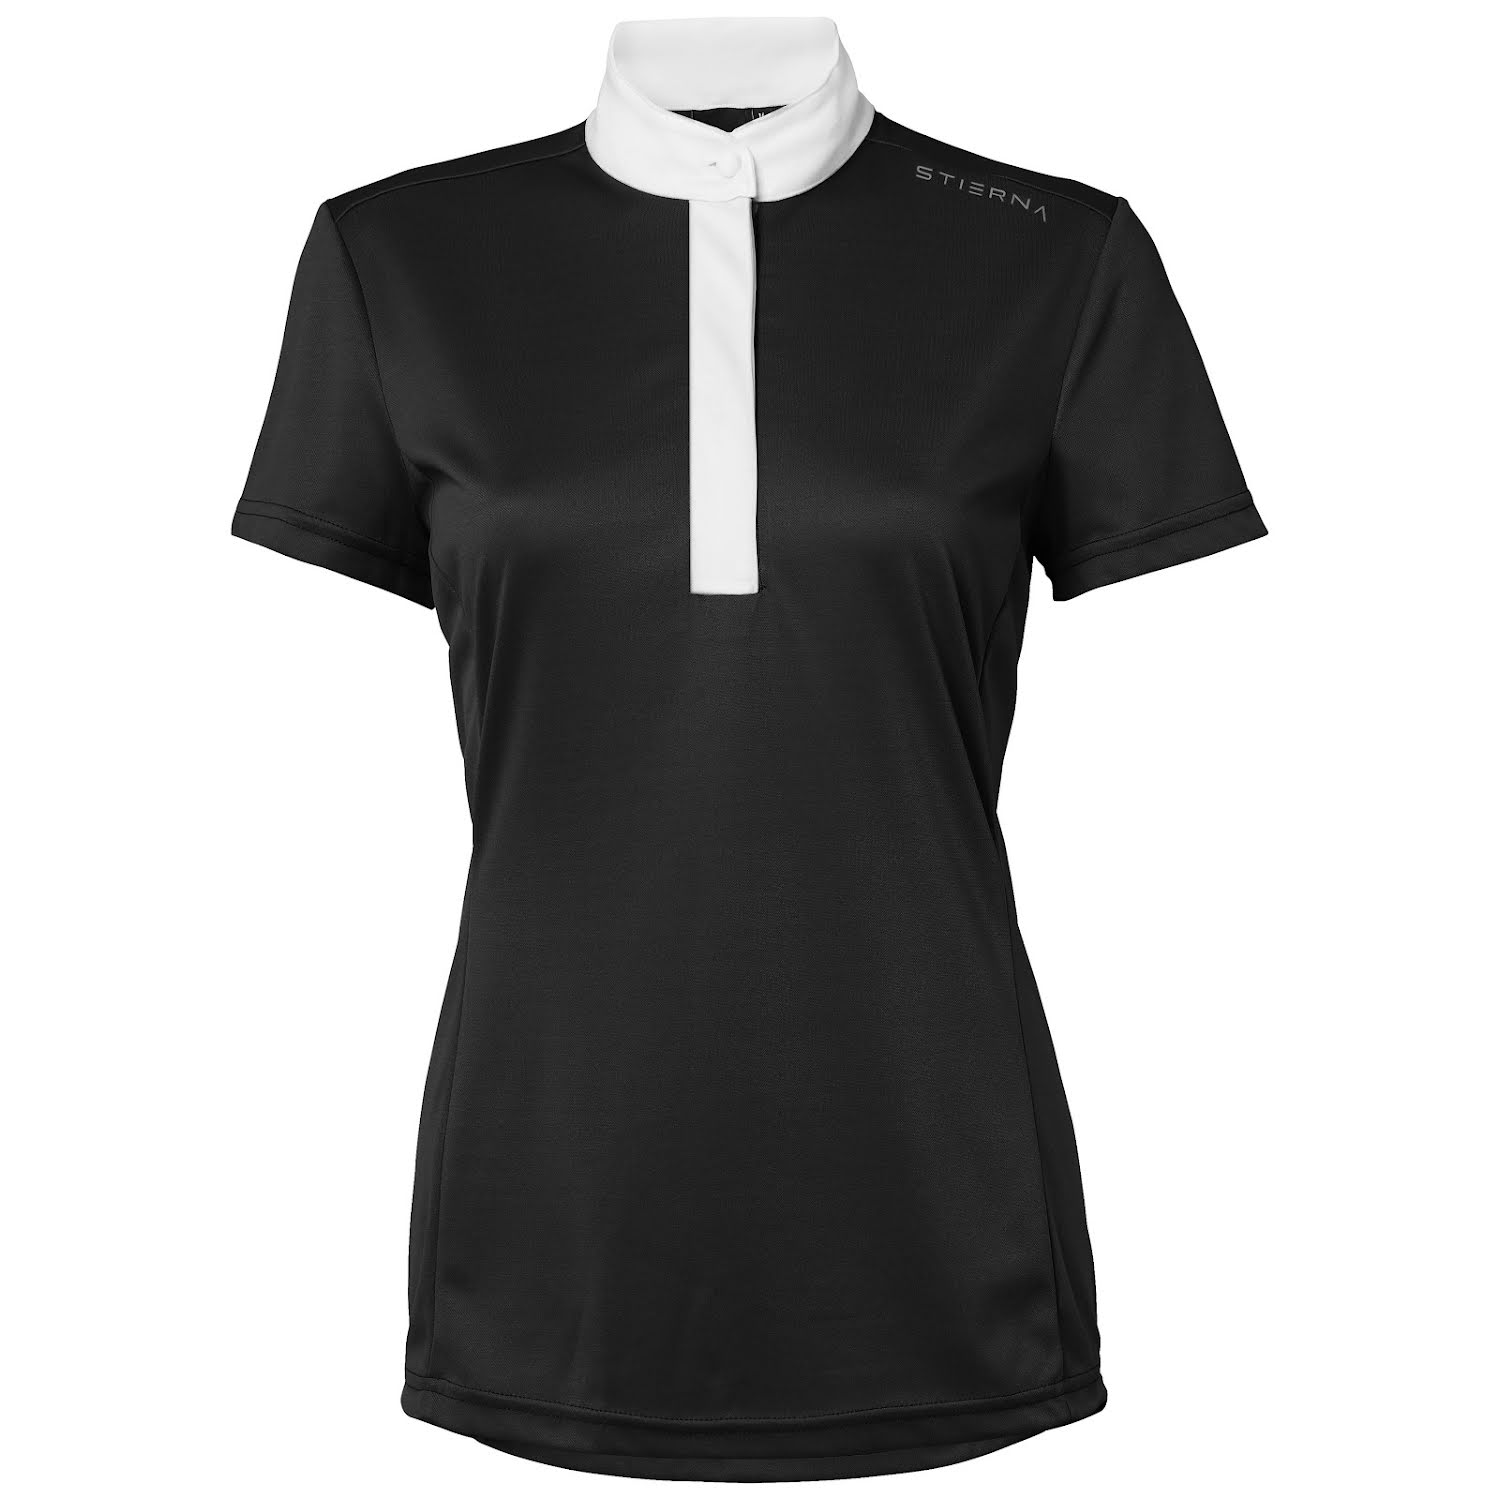 Halo Top Competition Top Black